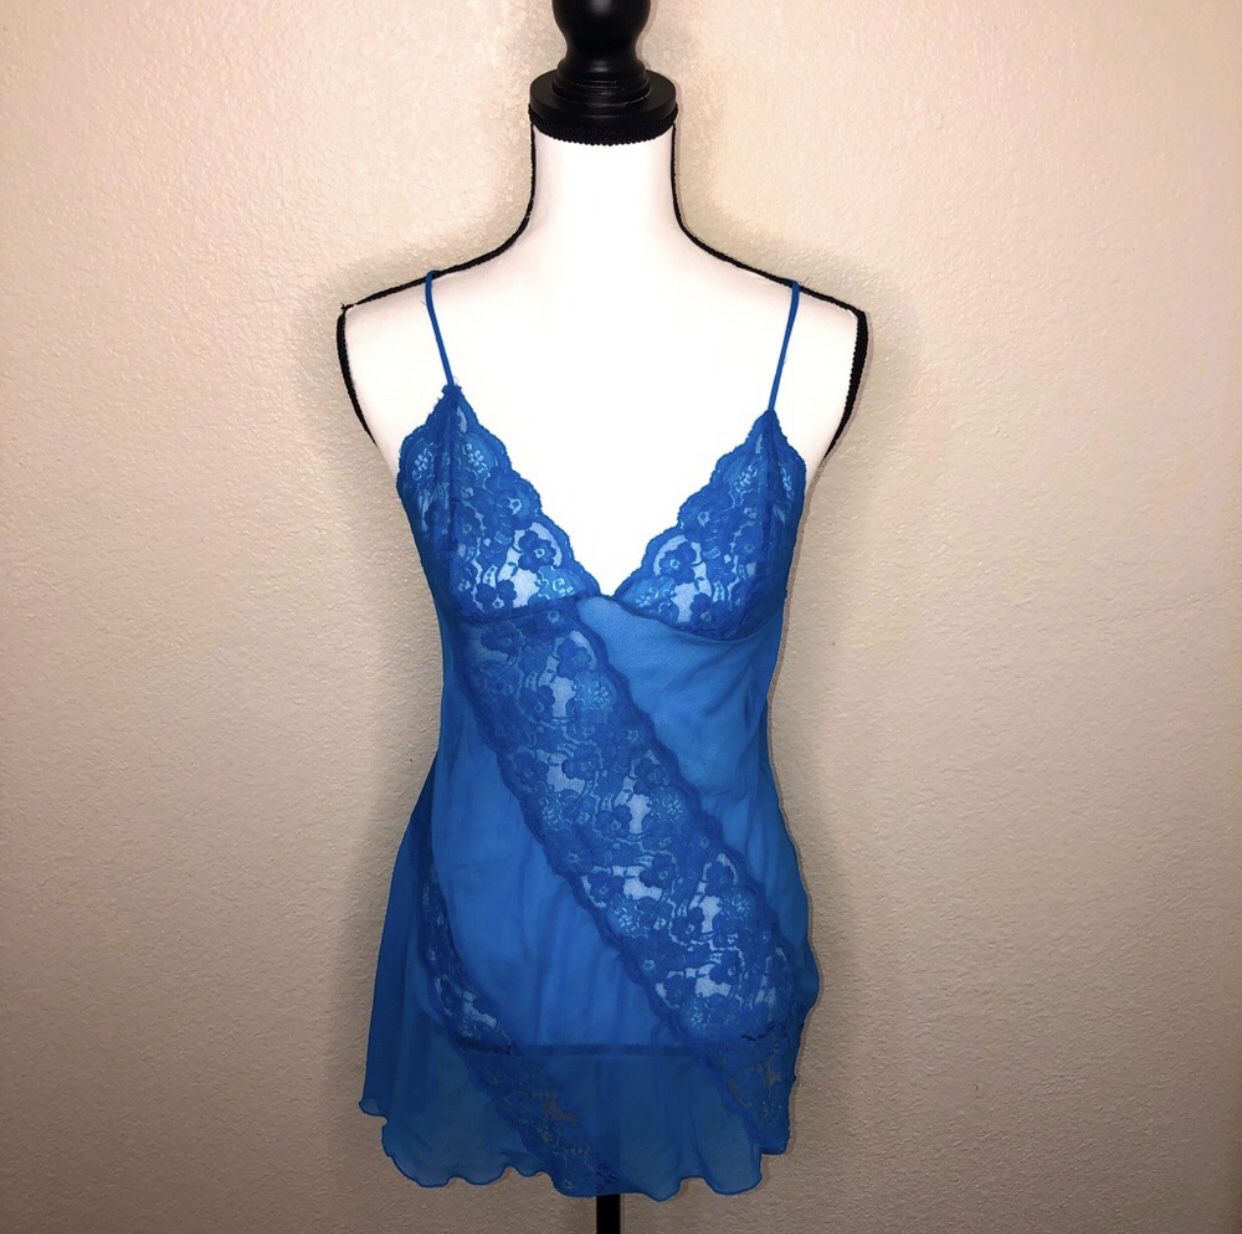 Fredericks of Hollywood Women’s Sexy Lingerie Nightgown Blue Lace Details Size L